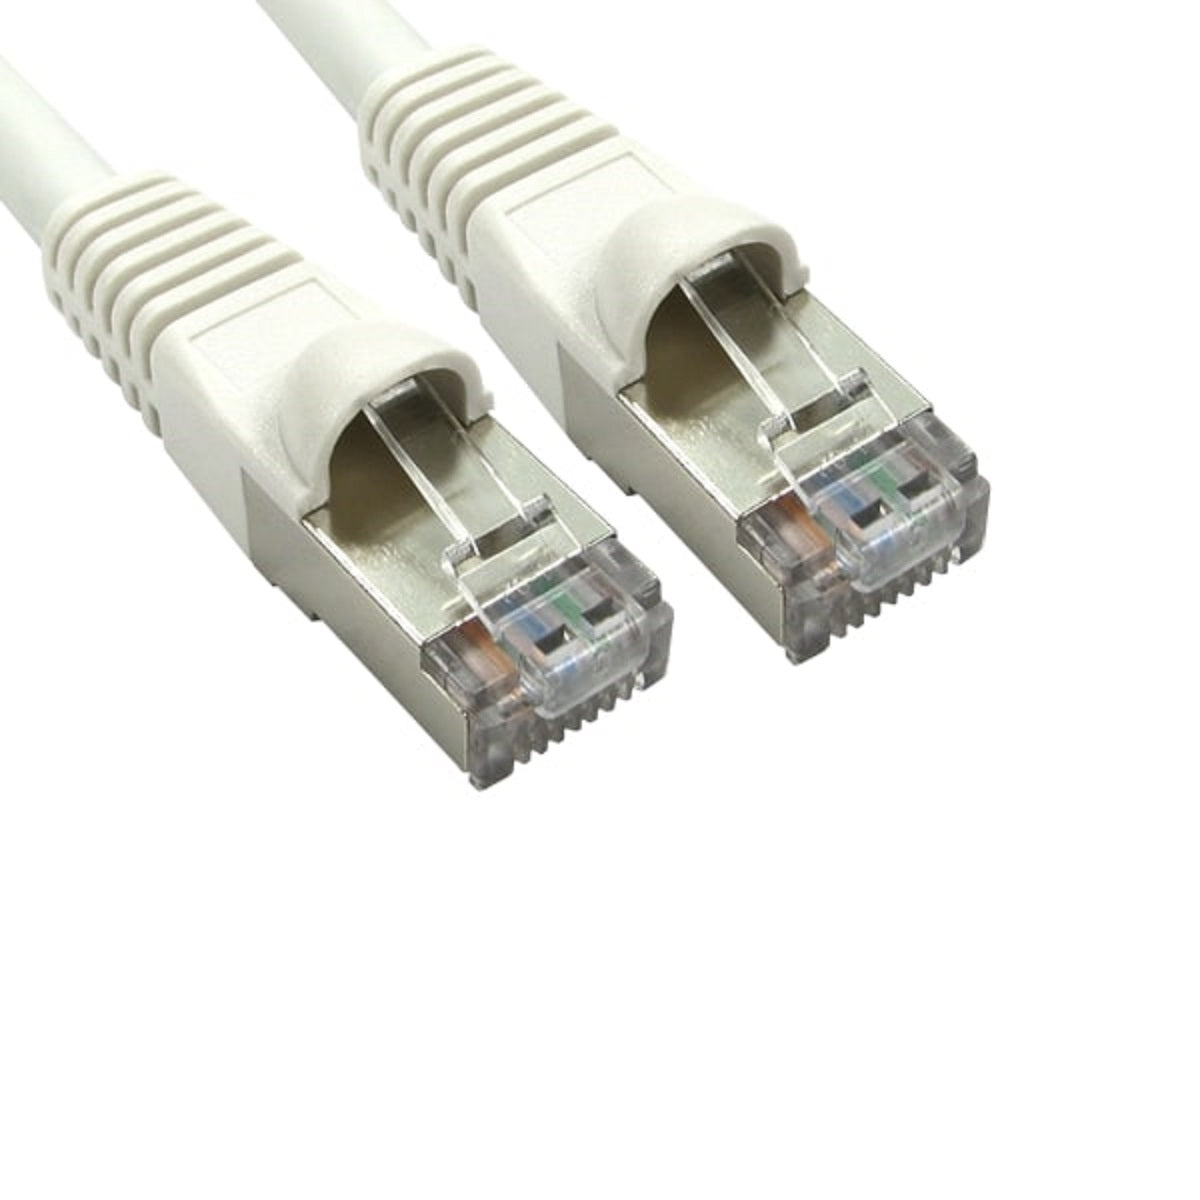 White Shielded ART-102W 2m CAT6a Ethernet Patch Cable